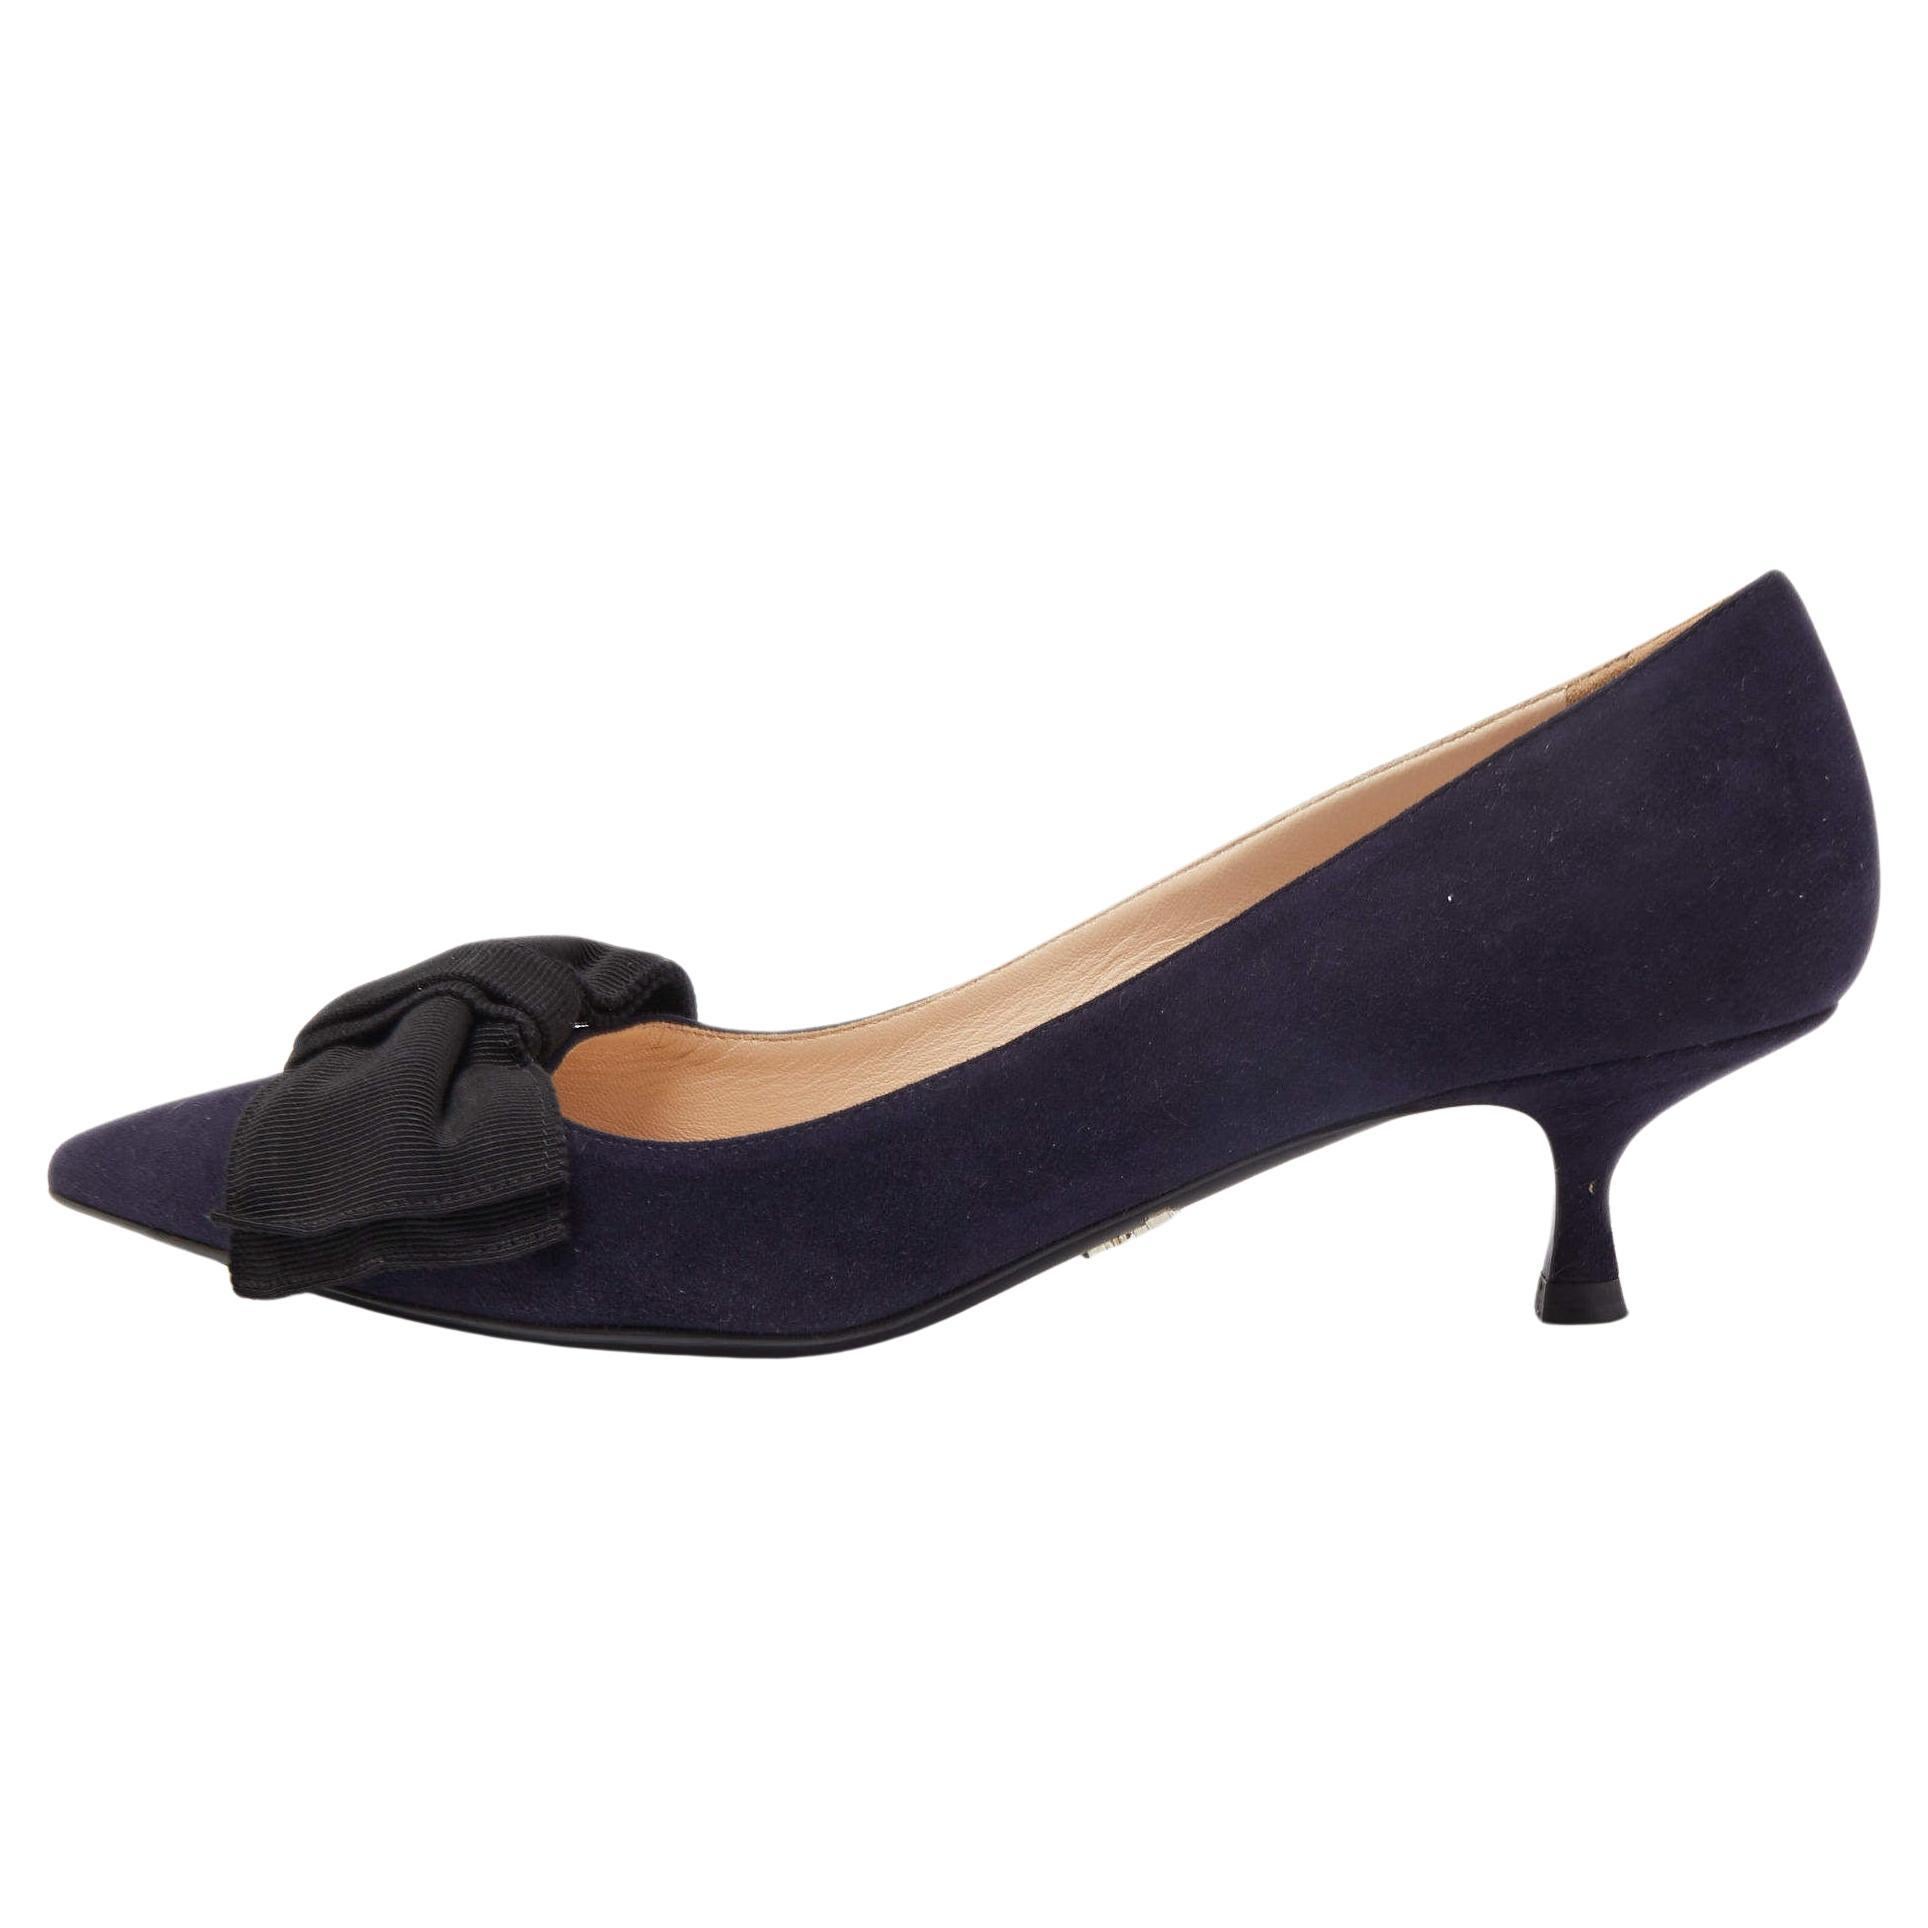 Prada Navy Blue Suede Pointed Toe Bow Pumps 